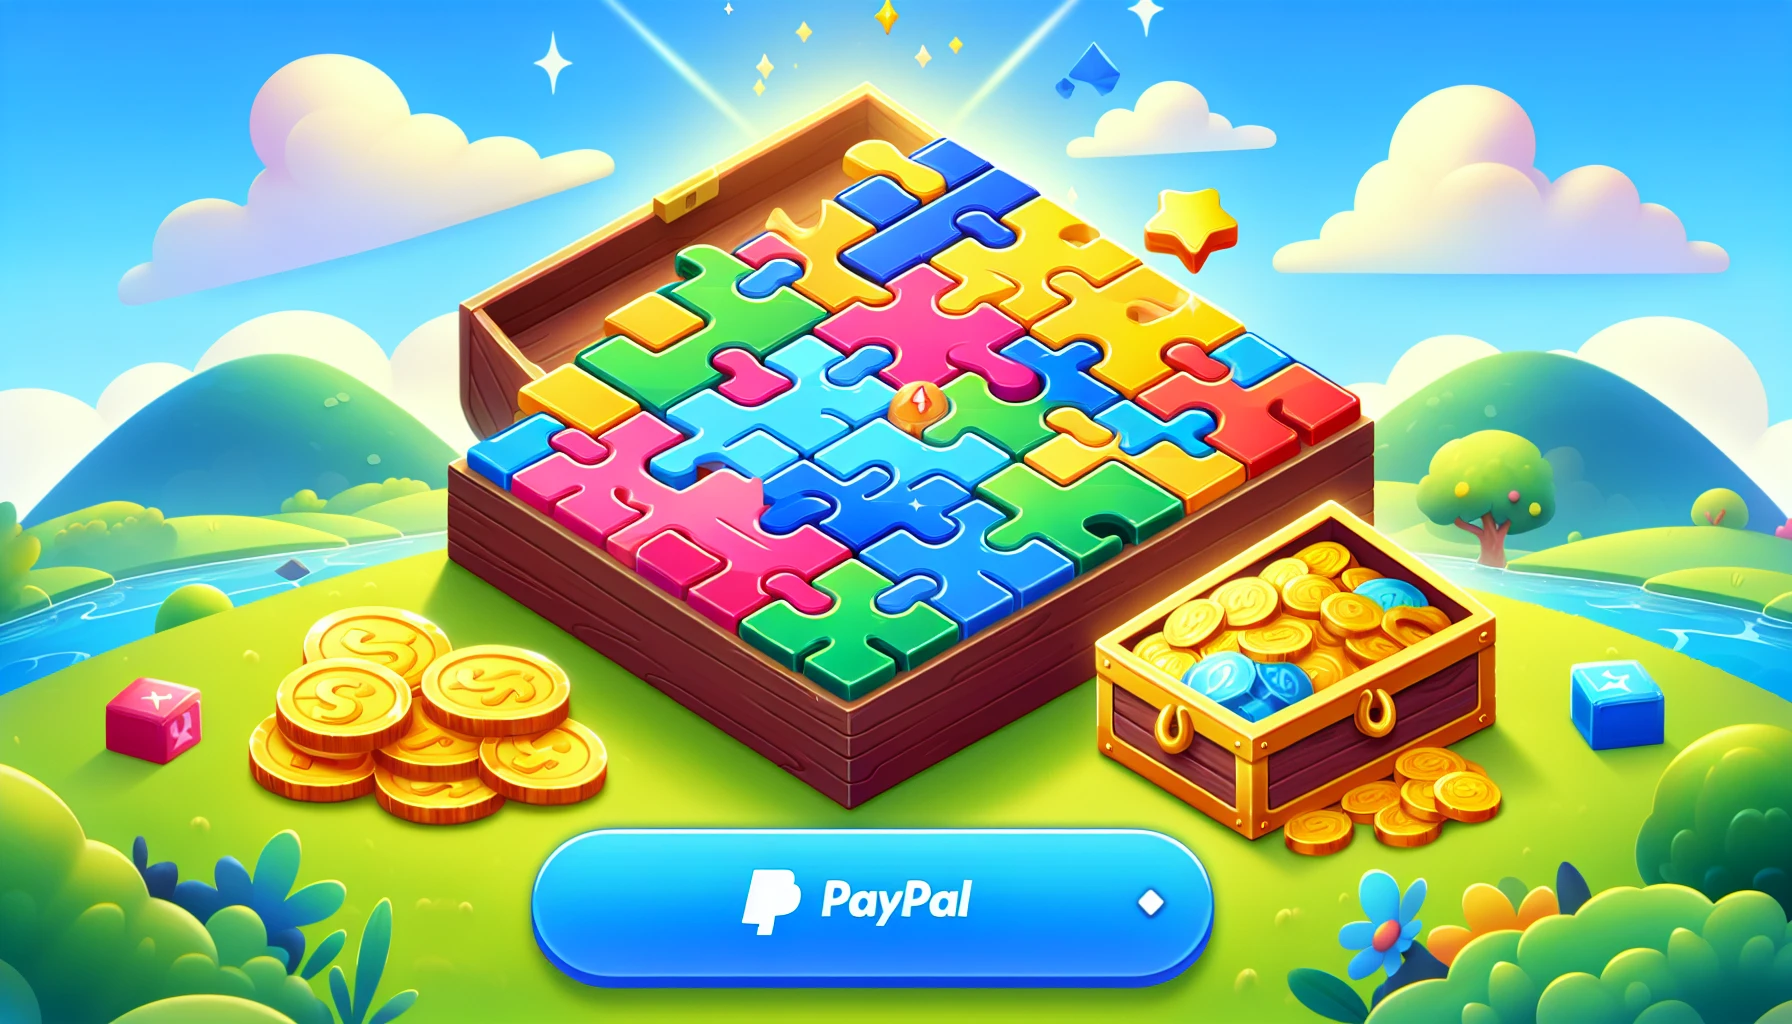 Engaging puzzle game interface with PayPal payment option